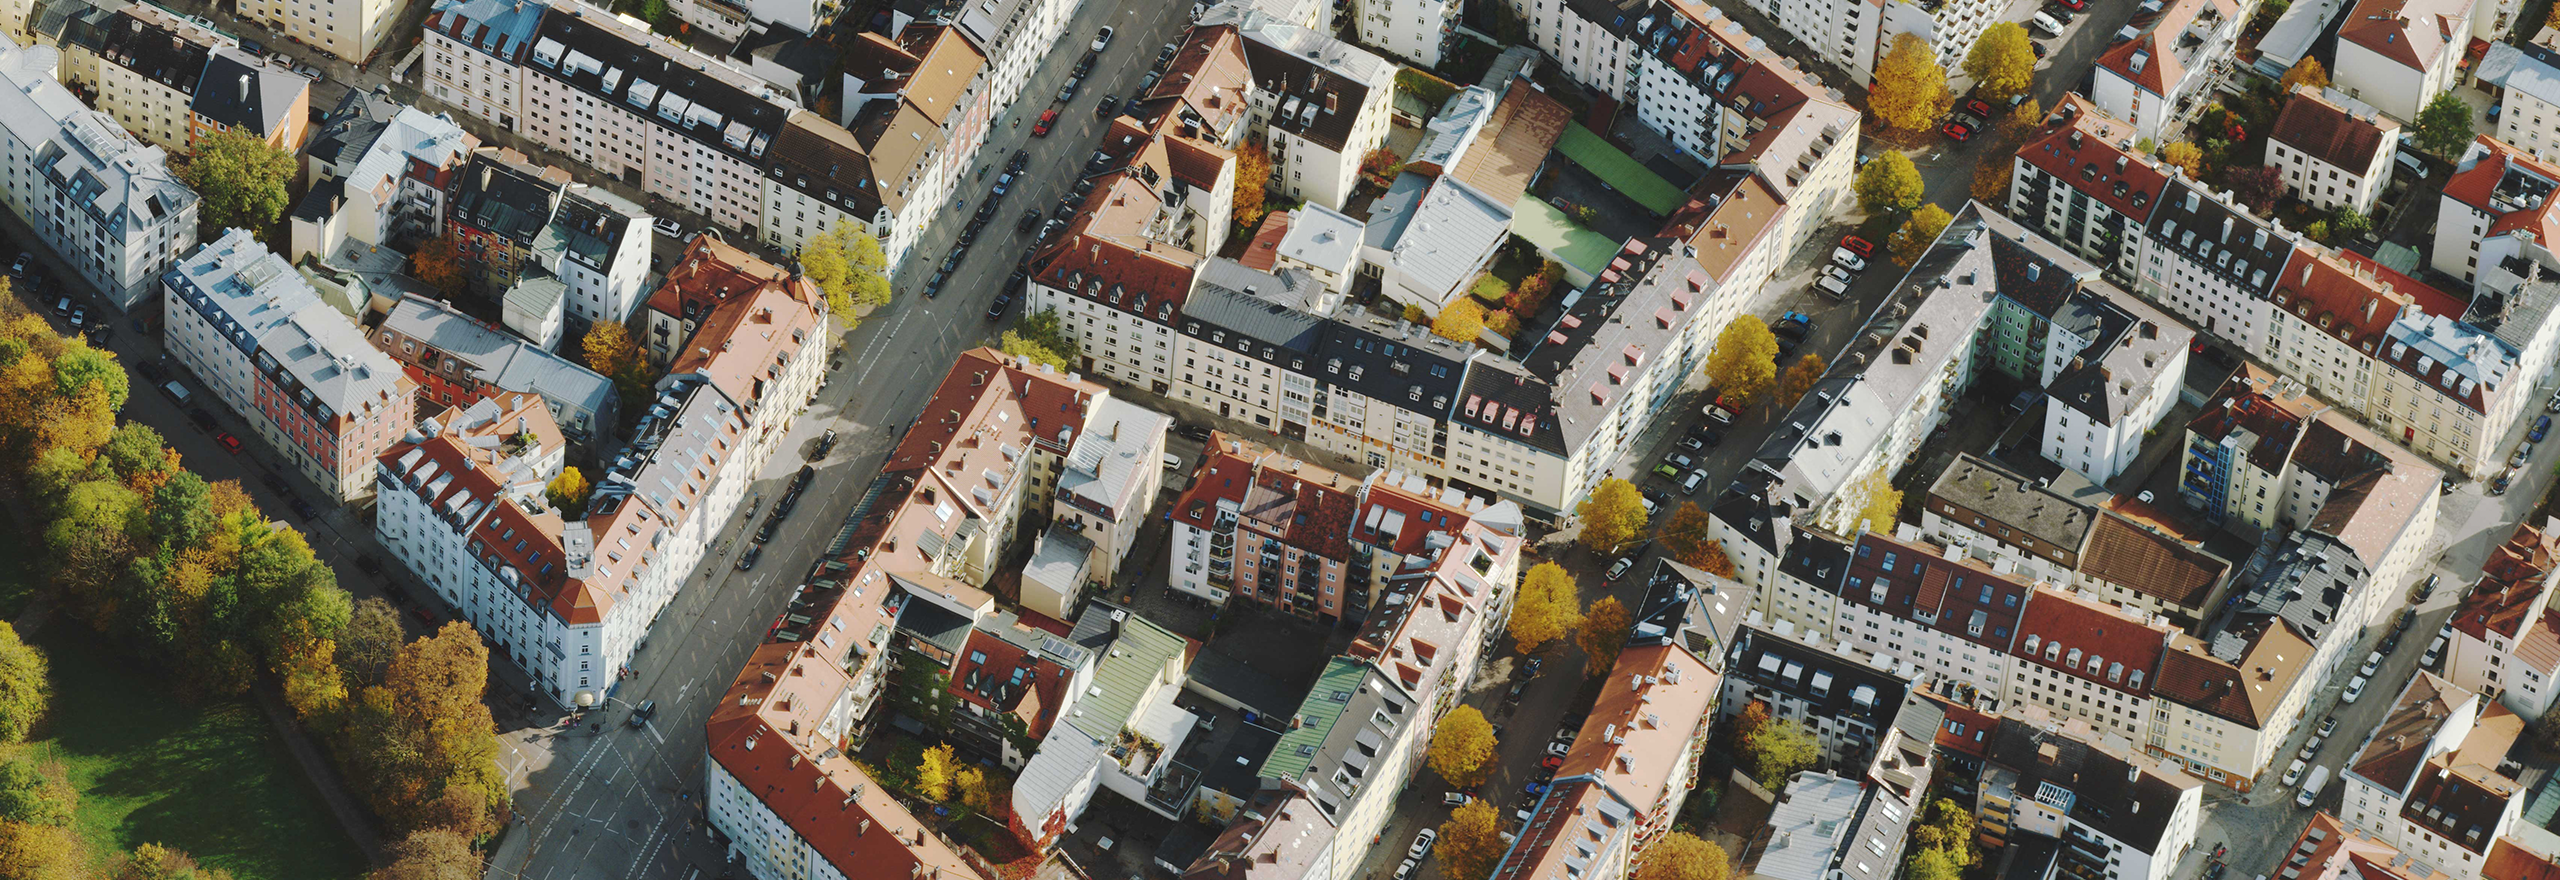 High-resolution oblique aerial imagery of buildings in Munich